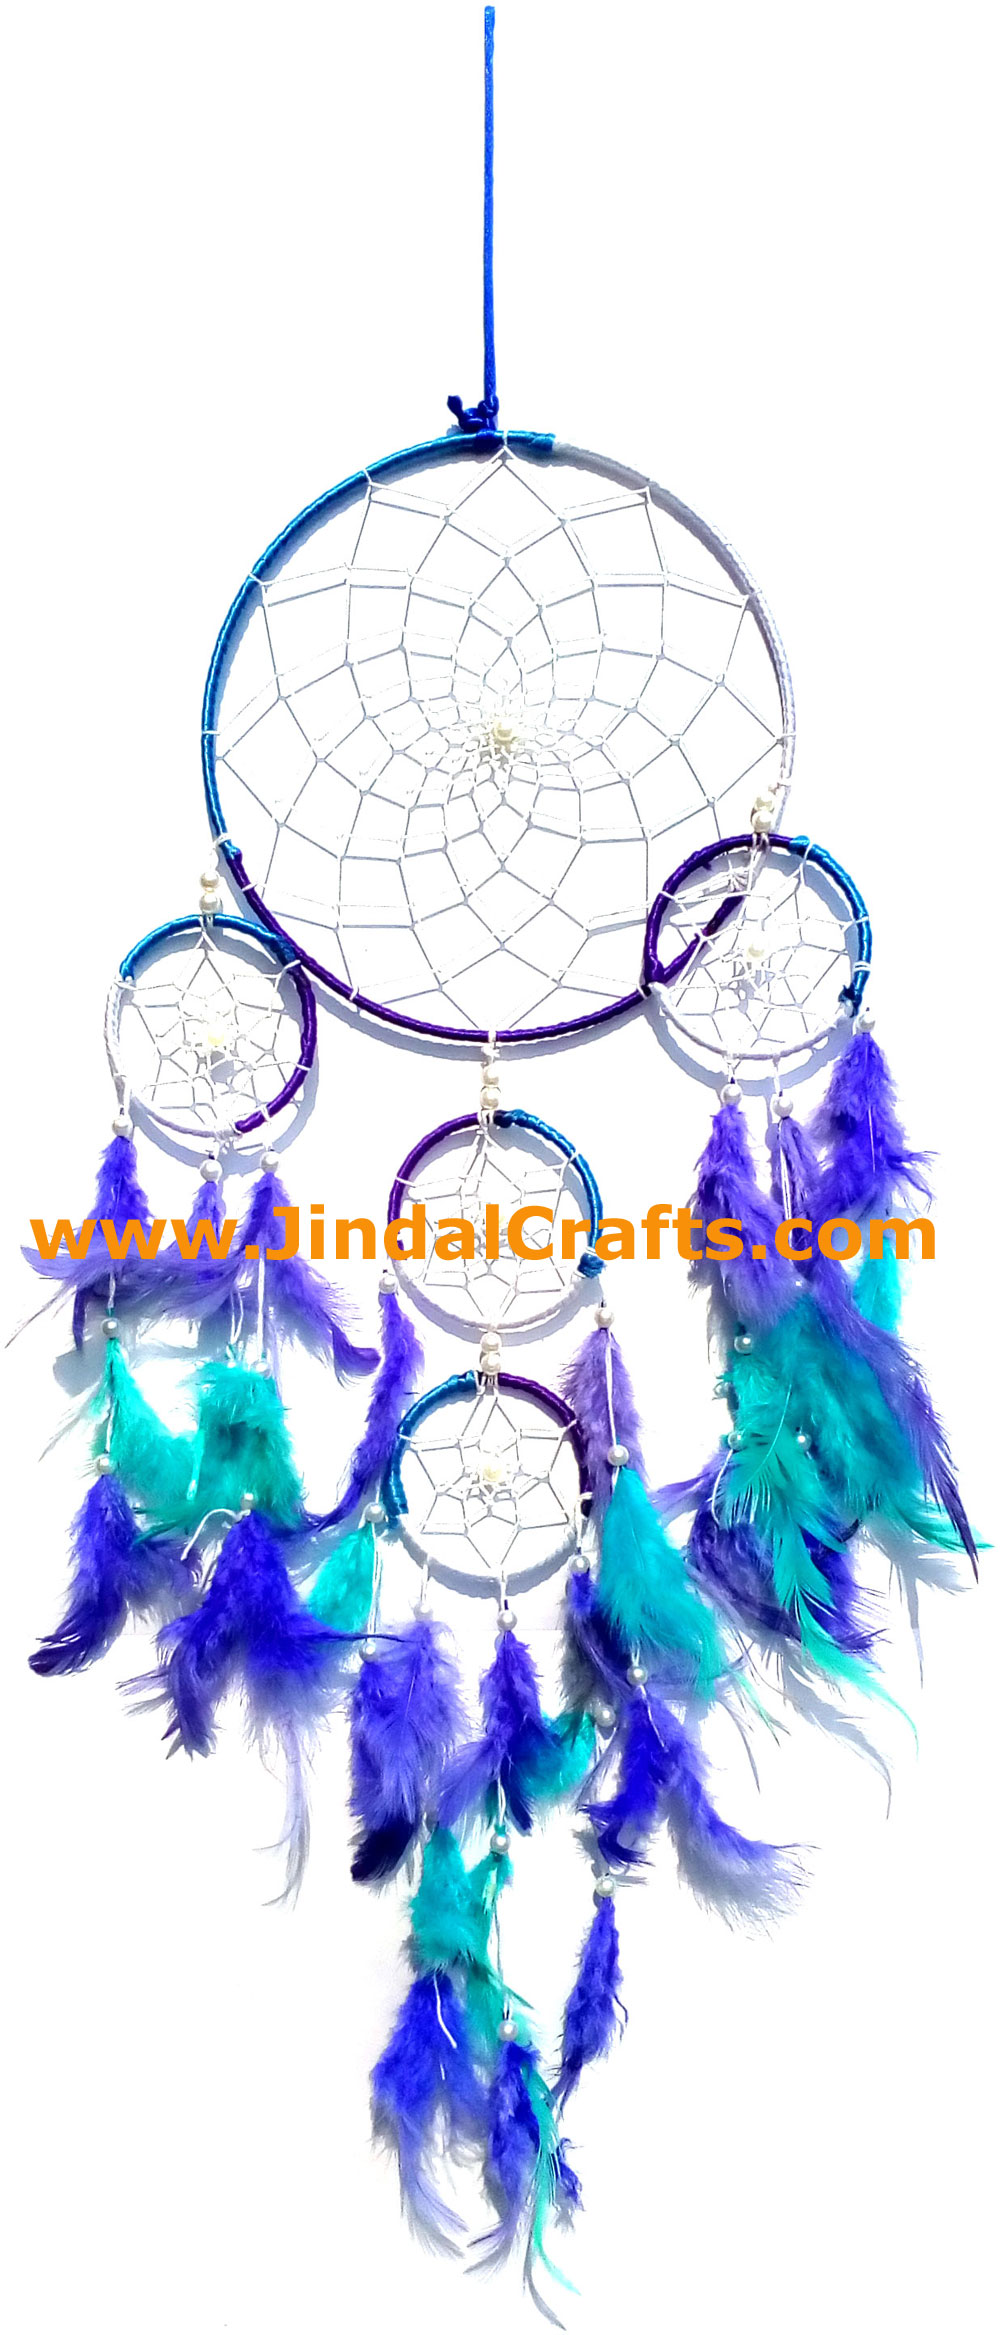 Dreamcatcher protects sleepers from bad dreams by catching them, while letting g